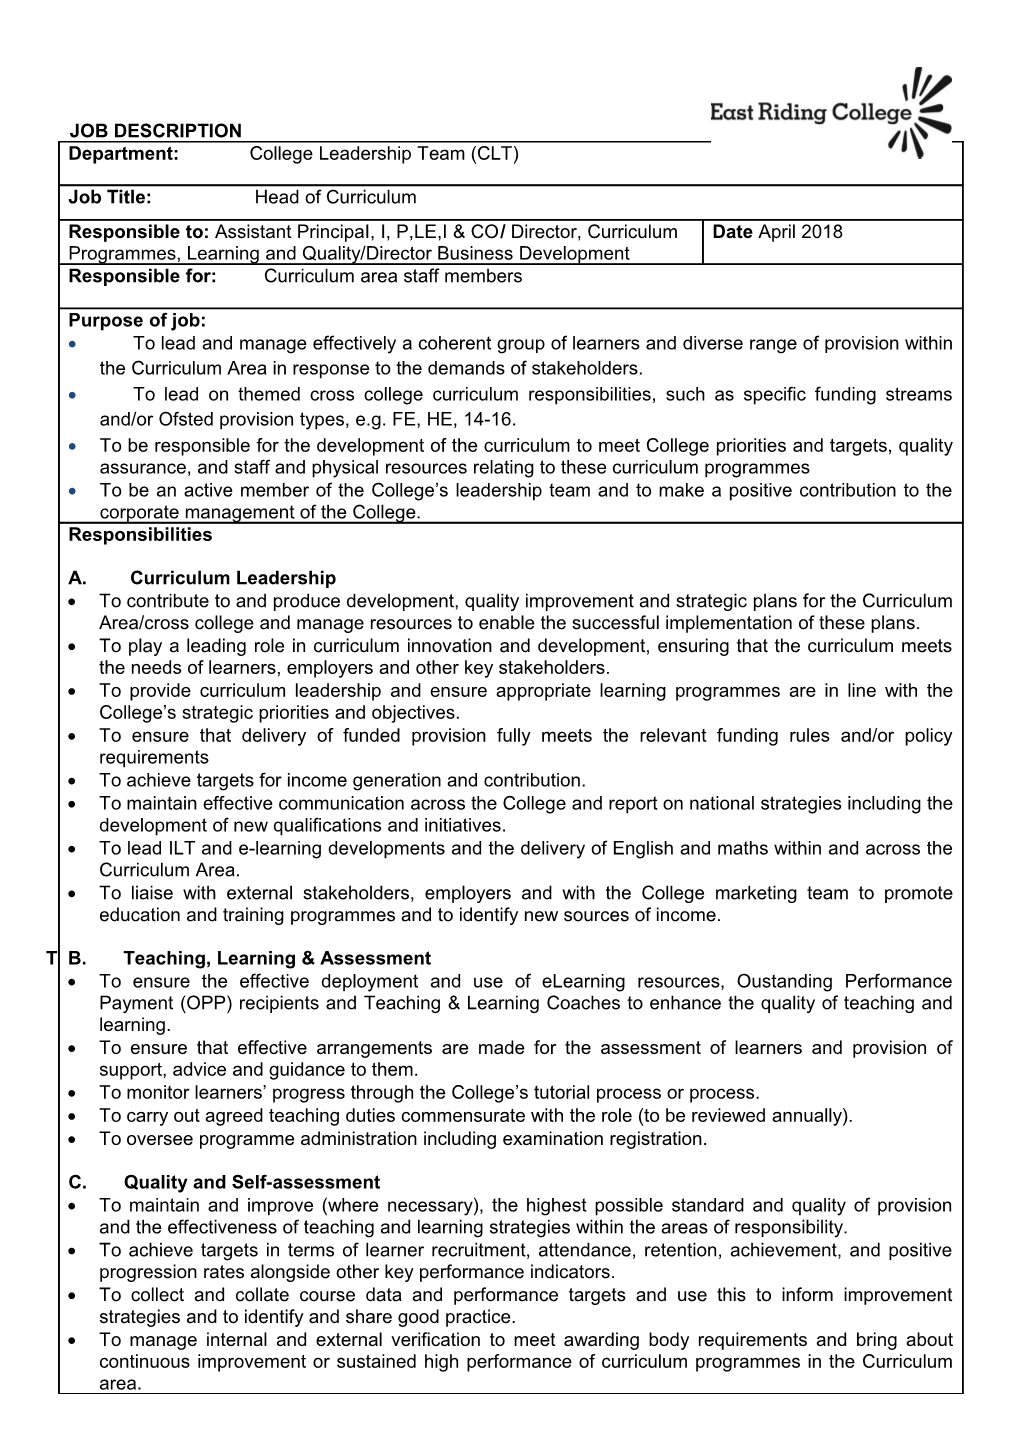 Job Description - Hoc - Early Years, Care and Access to HE